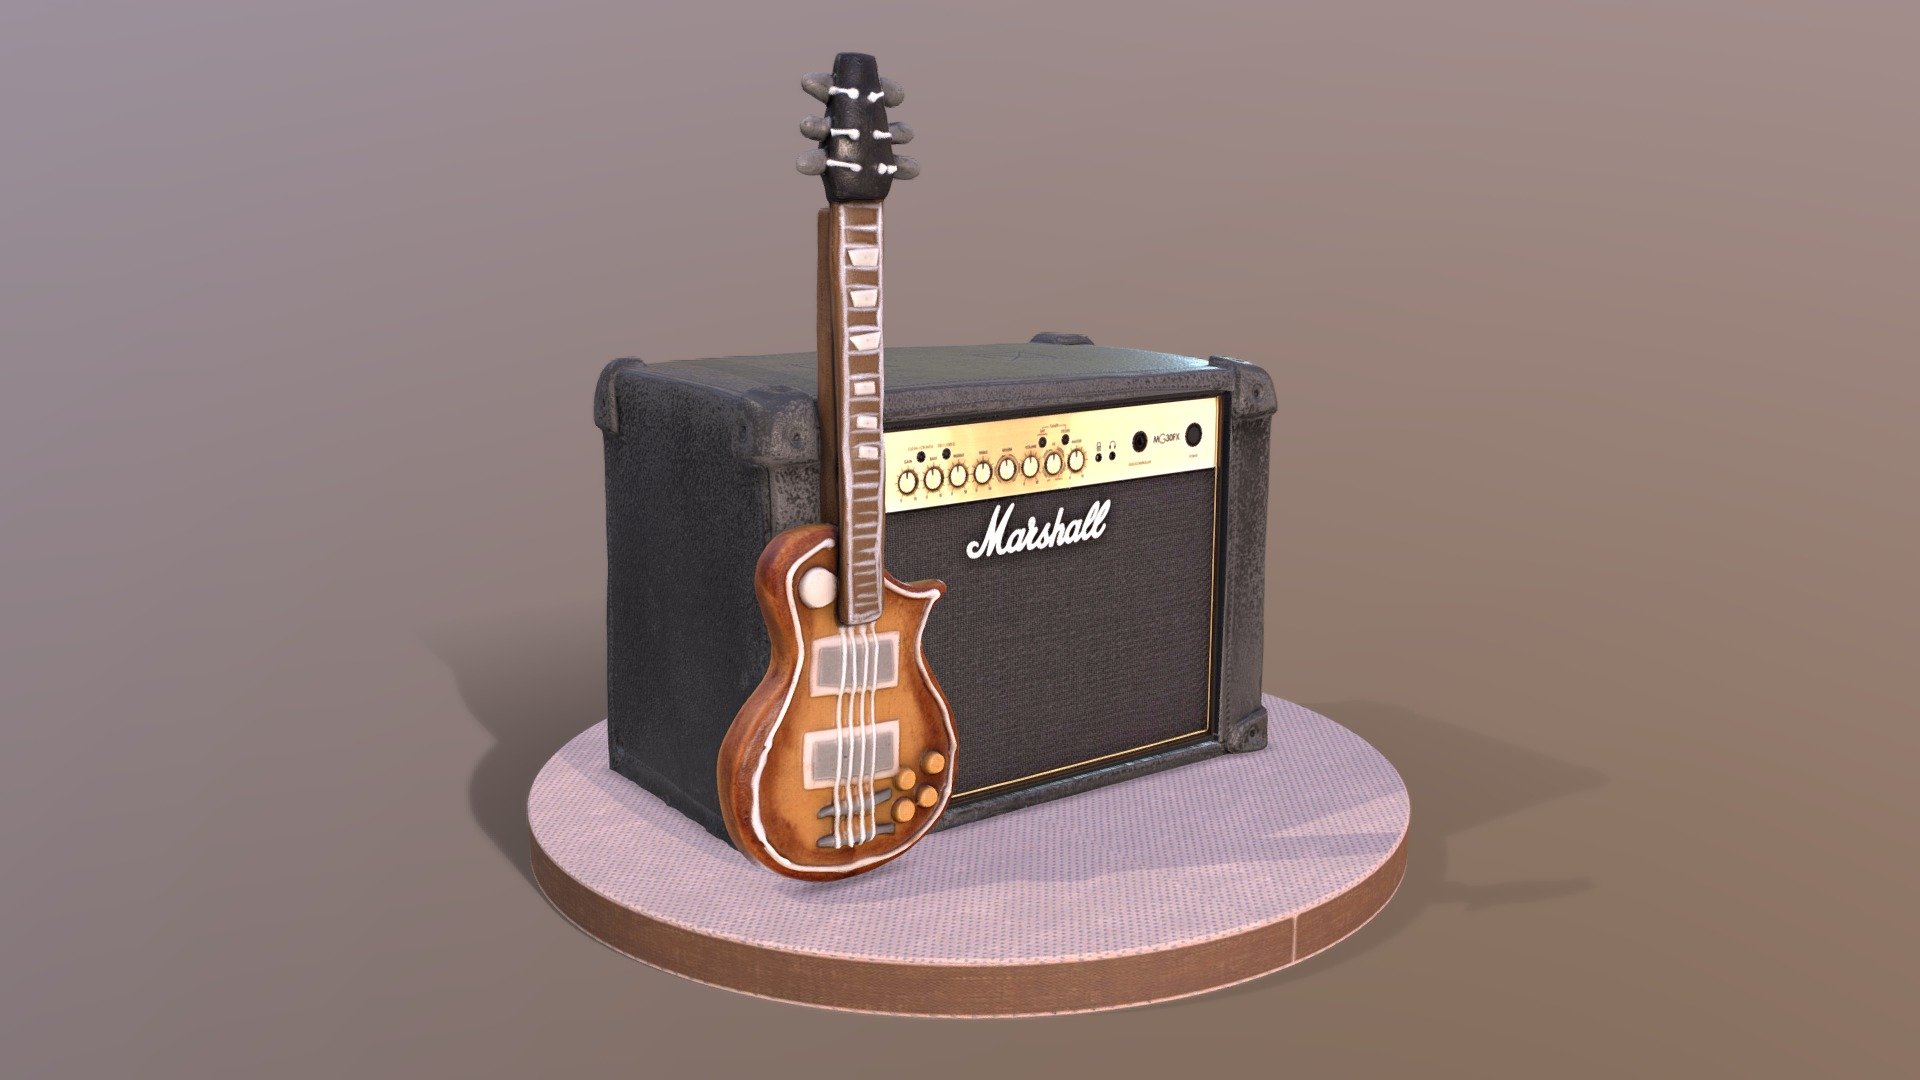 This legendery Marshall Gutar Amplifier Musician Cake model was created using photogrammetry which is made by CAKESBURG Premium Cake Shop in the UK. You can purchase real cake from this link: https://cakesburg.co.uk/products/marshall-guitar-amplifier-guitarist-cake-3?_pos=2&amp;_sid=ece476f69&amp;_ss=r

Textures 2X 4096*4096px PBR photoscan-based materials Base Color, Normal Map, Roughness) - Guitar and Amplifier Musician Cake - Buy Royalty Free 3D model by Cakesburg Premium 3D Cake Shop (@Viscom_Cakesburg) 3d model